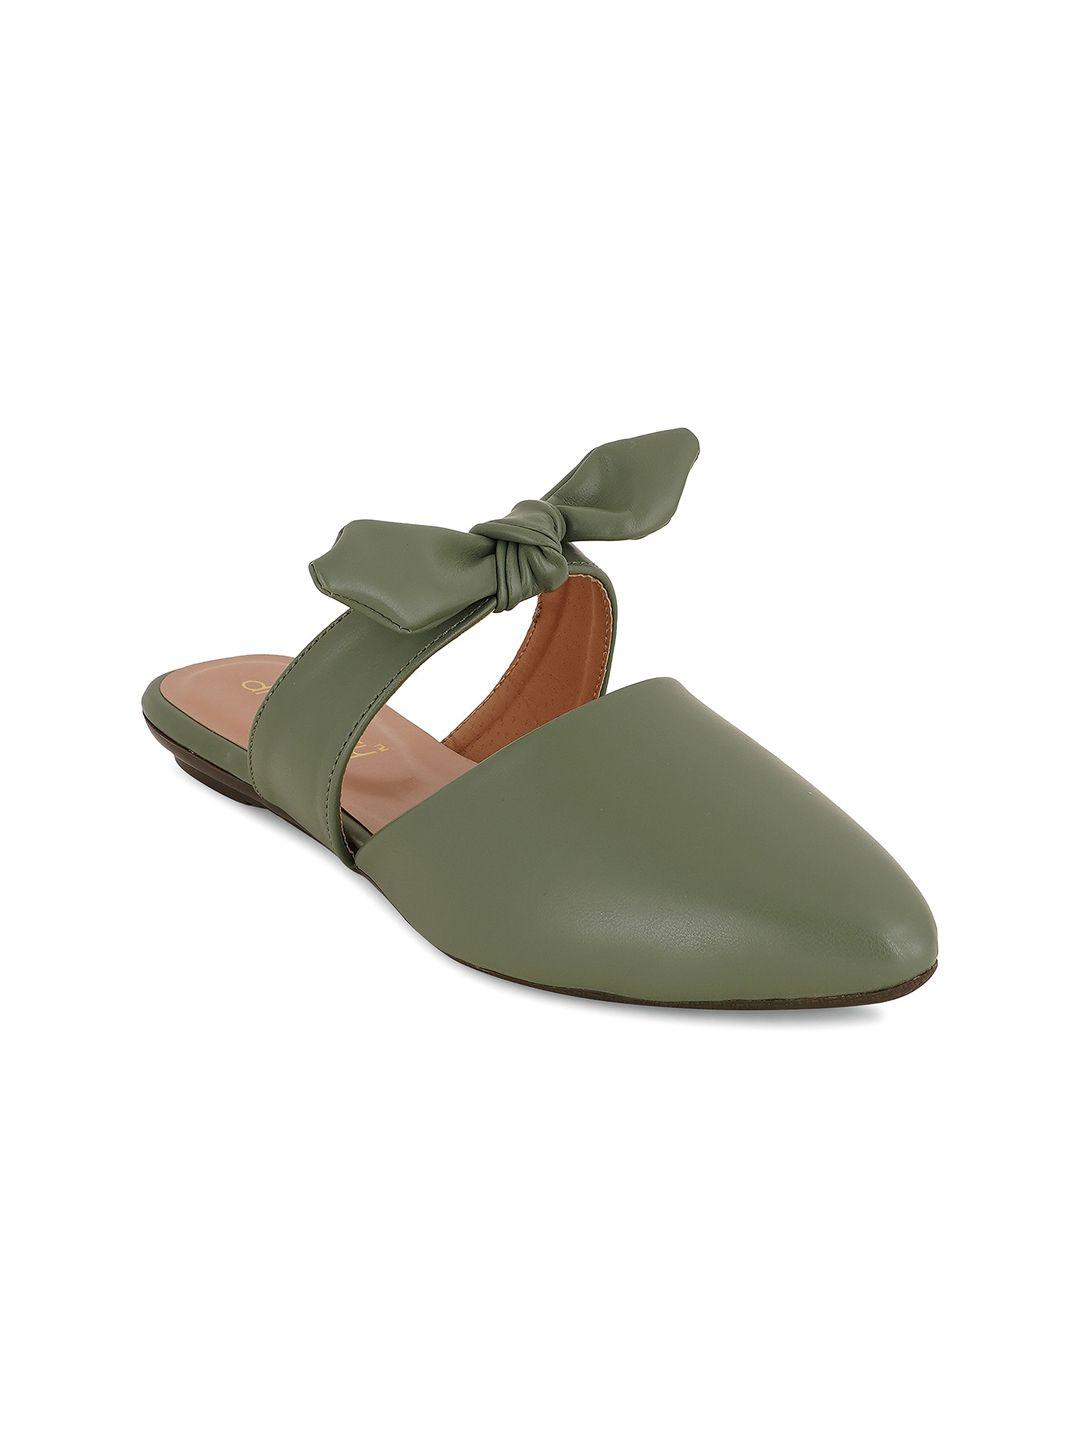 dressberry women olive green pointed toe mules with bows